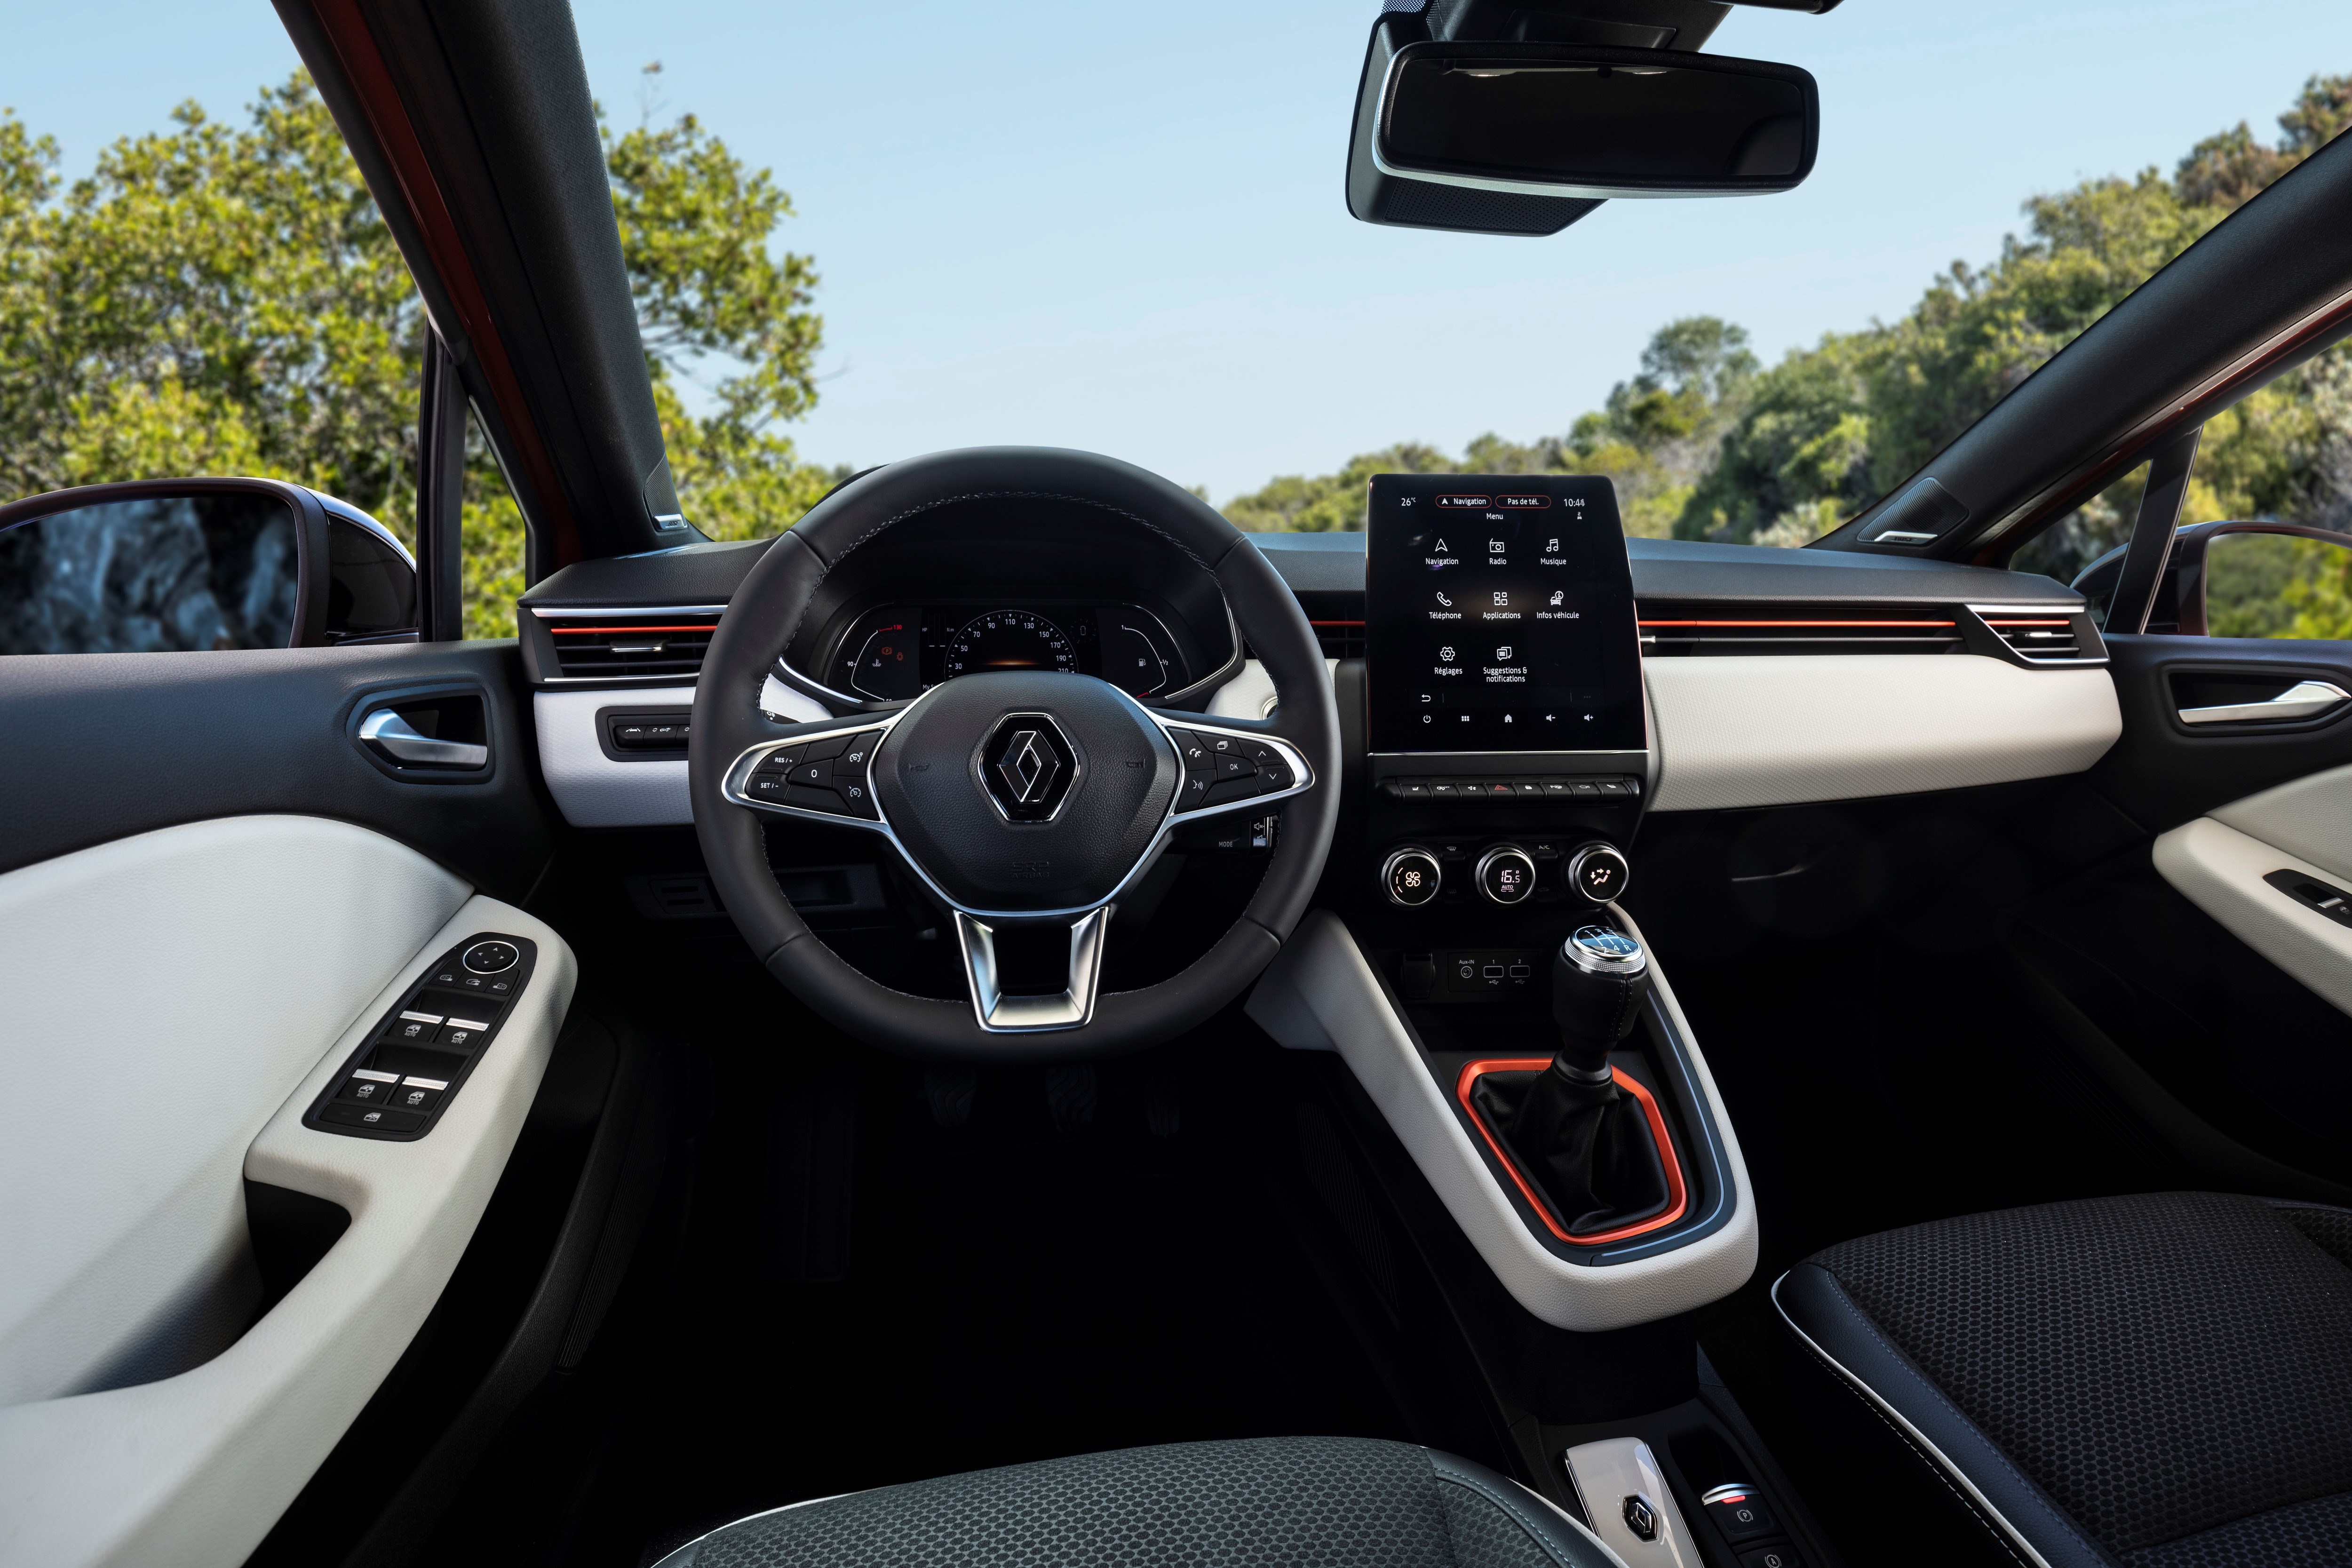 2019 Renault Clio 547263 Best Quality Free High